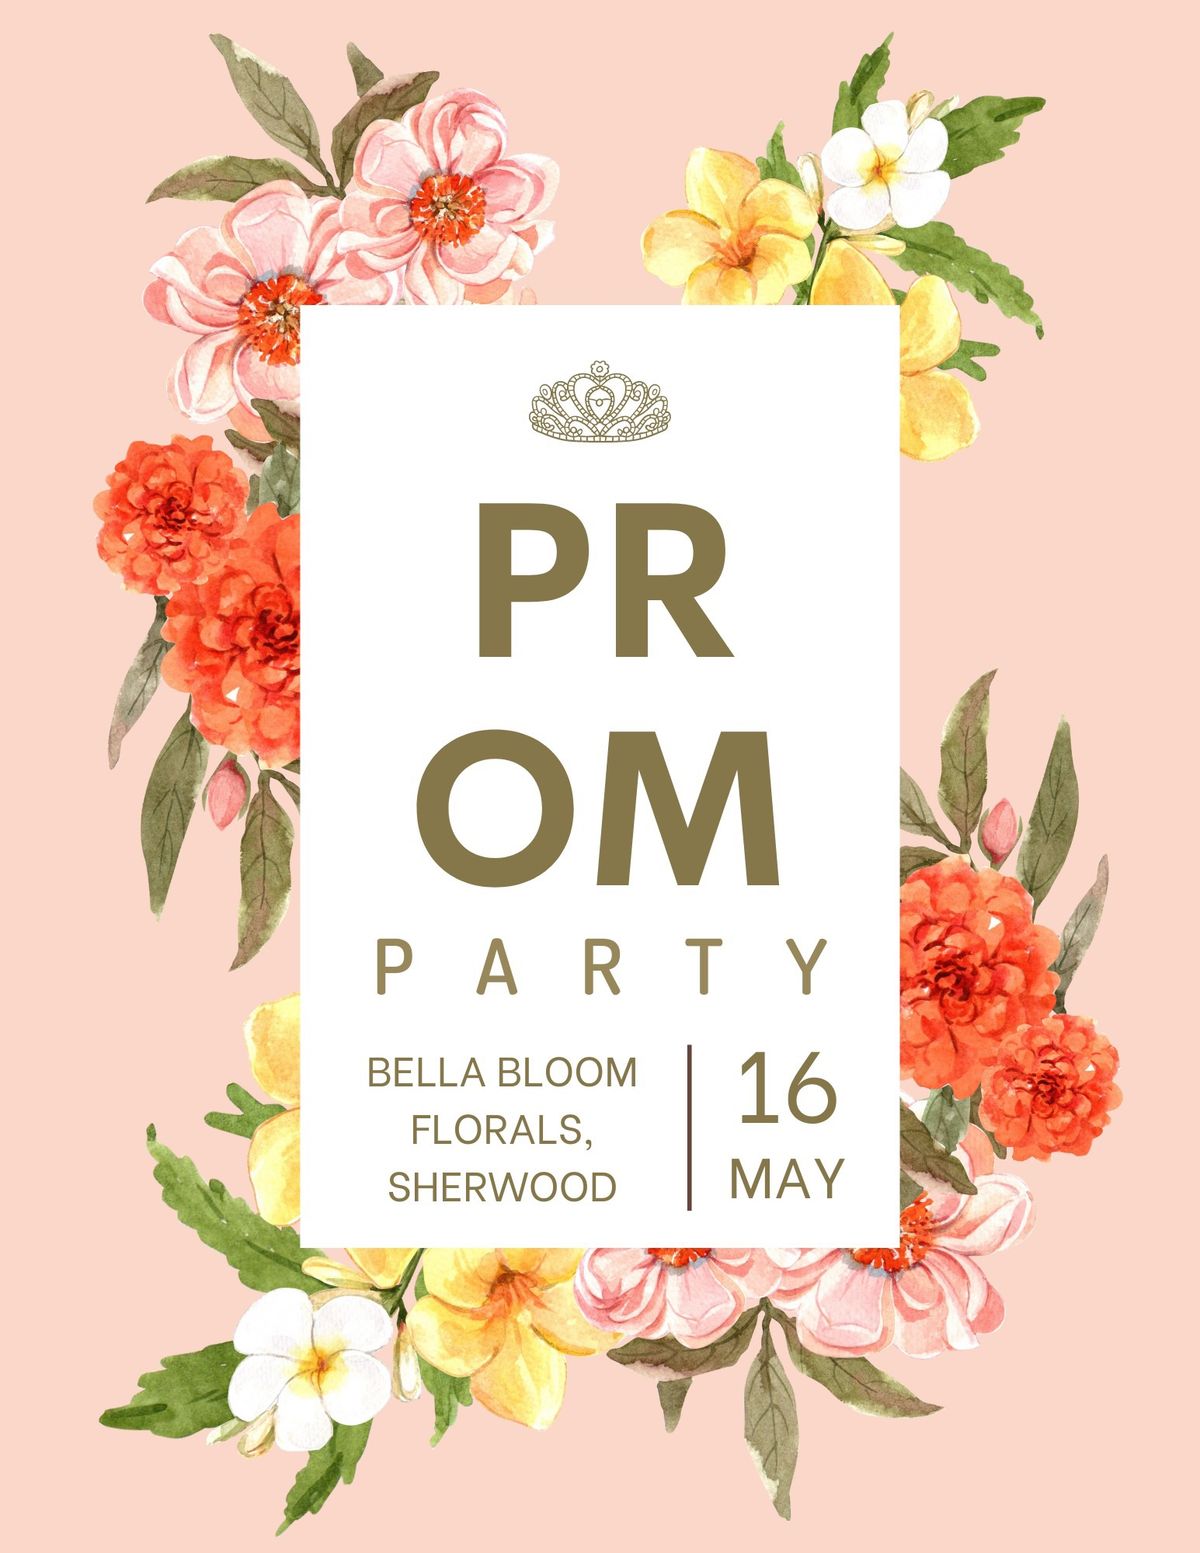 PROM party | DIY Prom Flowers